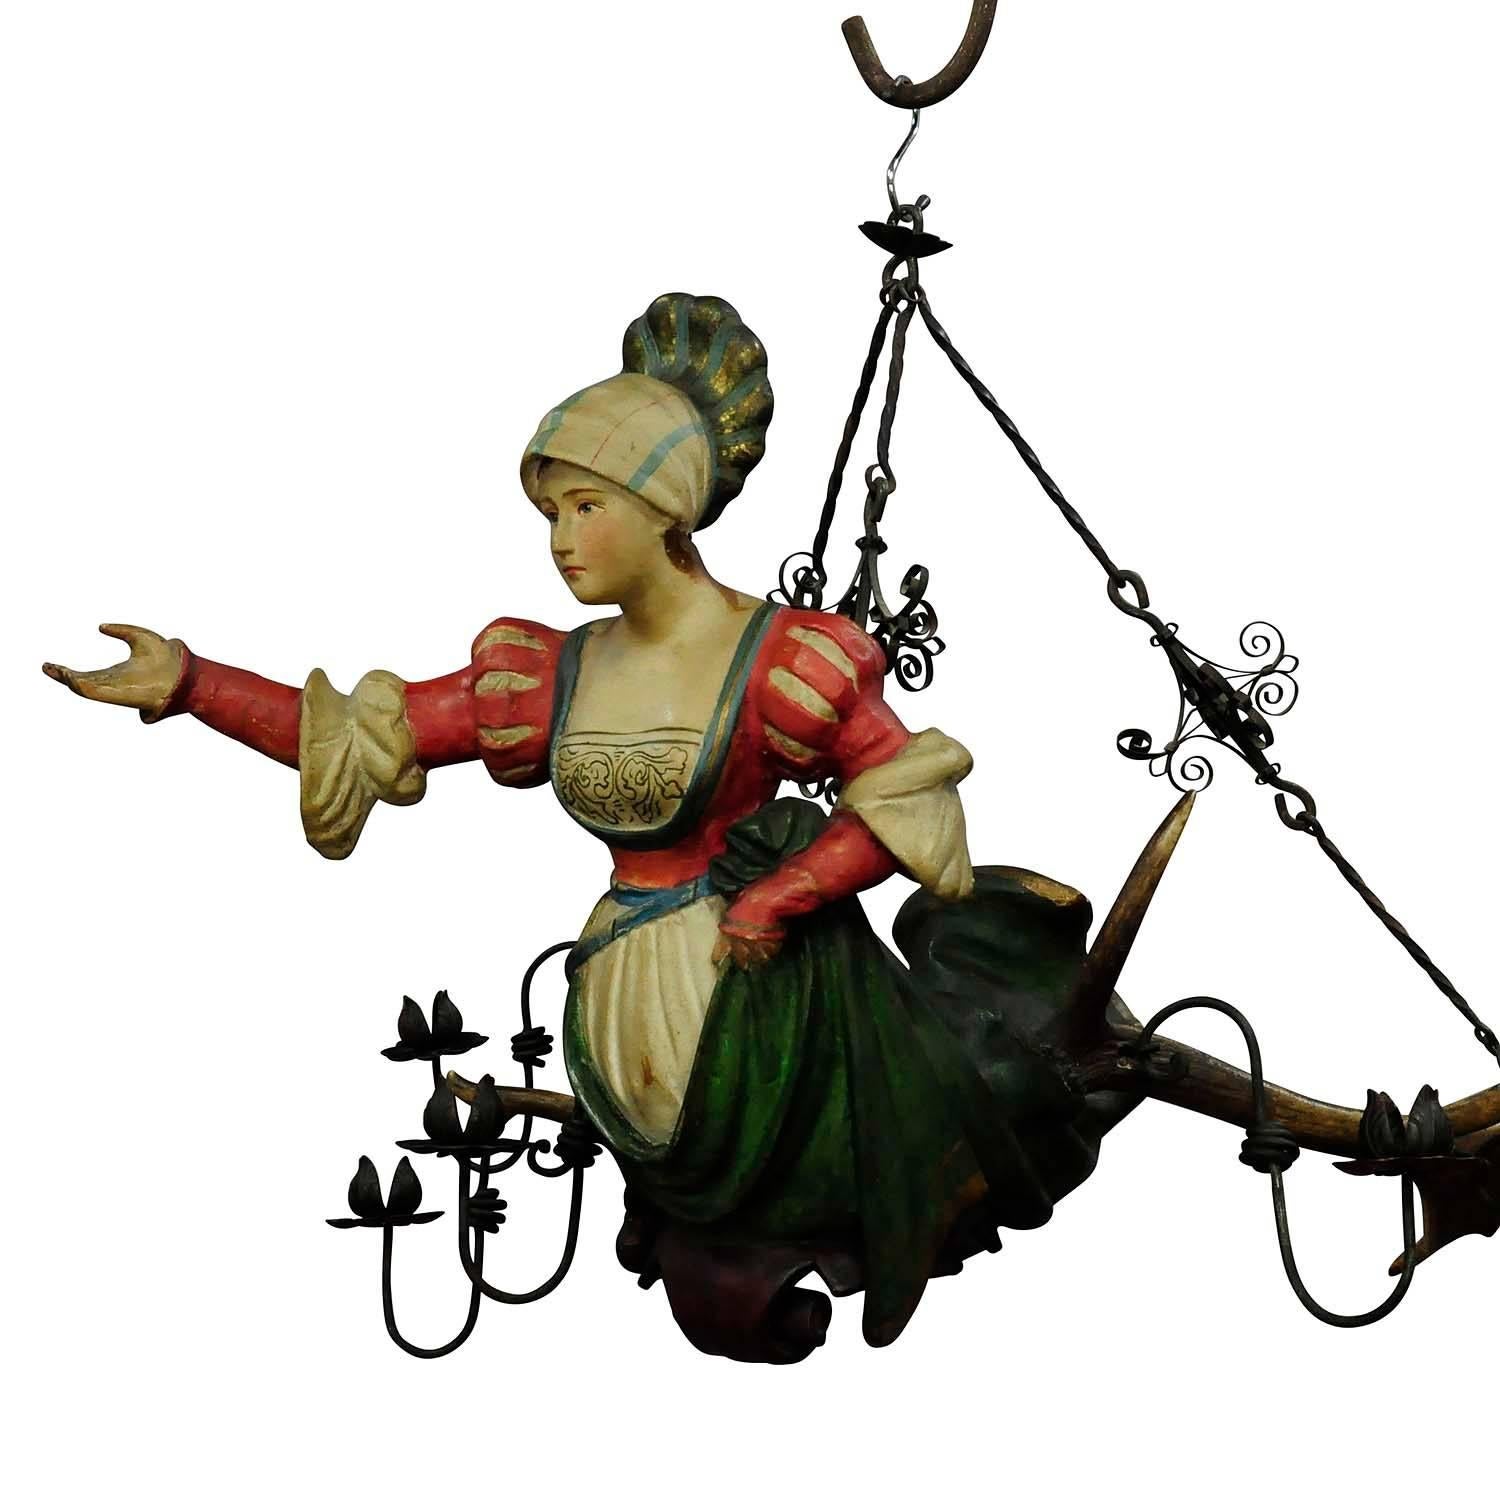 A rare antique lüsterweibchen chandelier with a papier-mâché sculpture of a Victorian lady with original antlers. Executed, circa 1890.

Measures: Length: 27.56